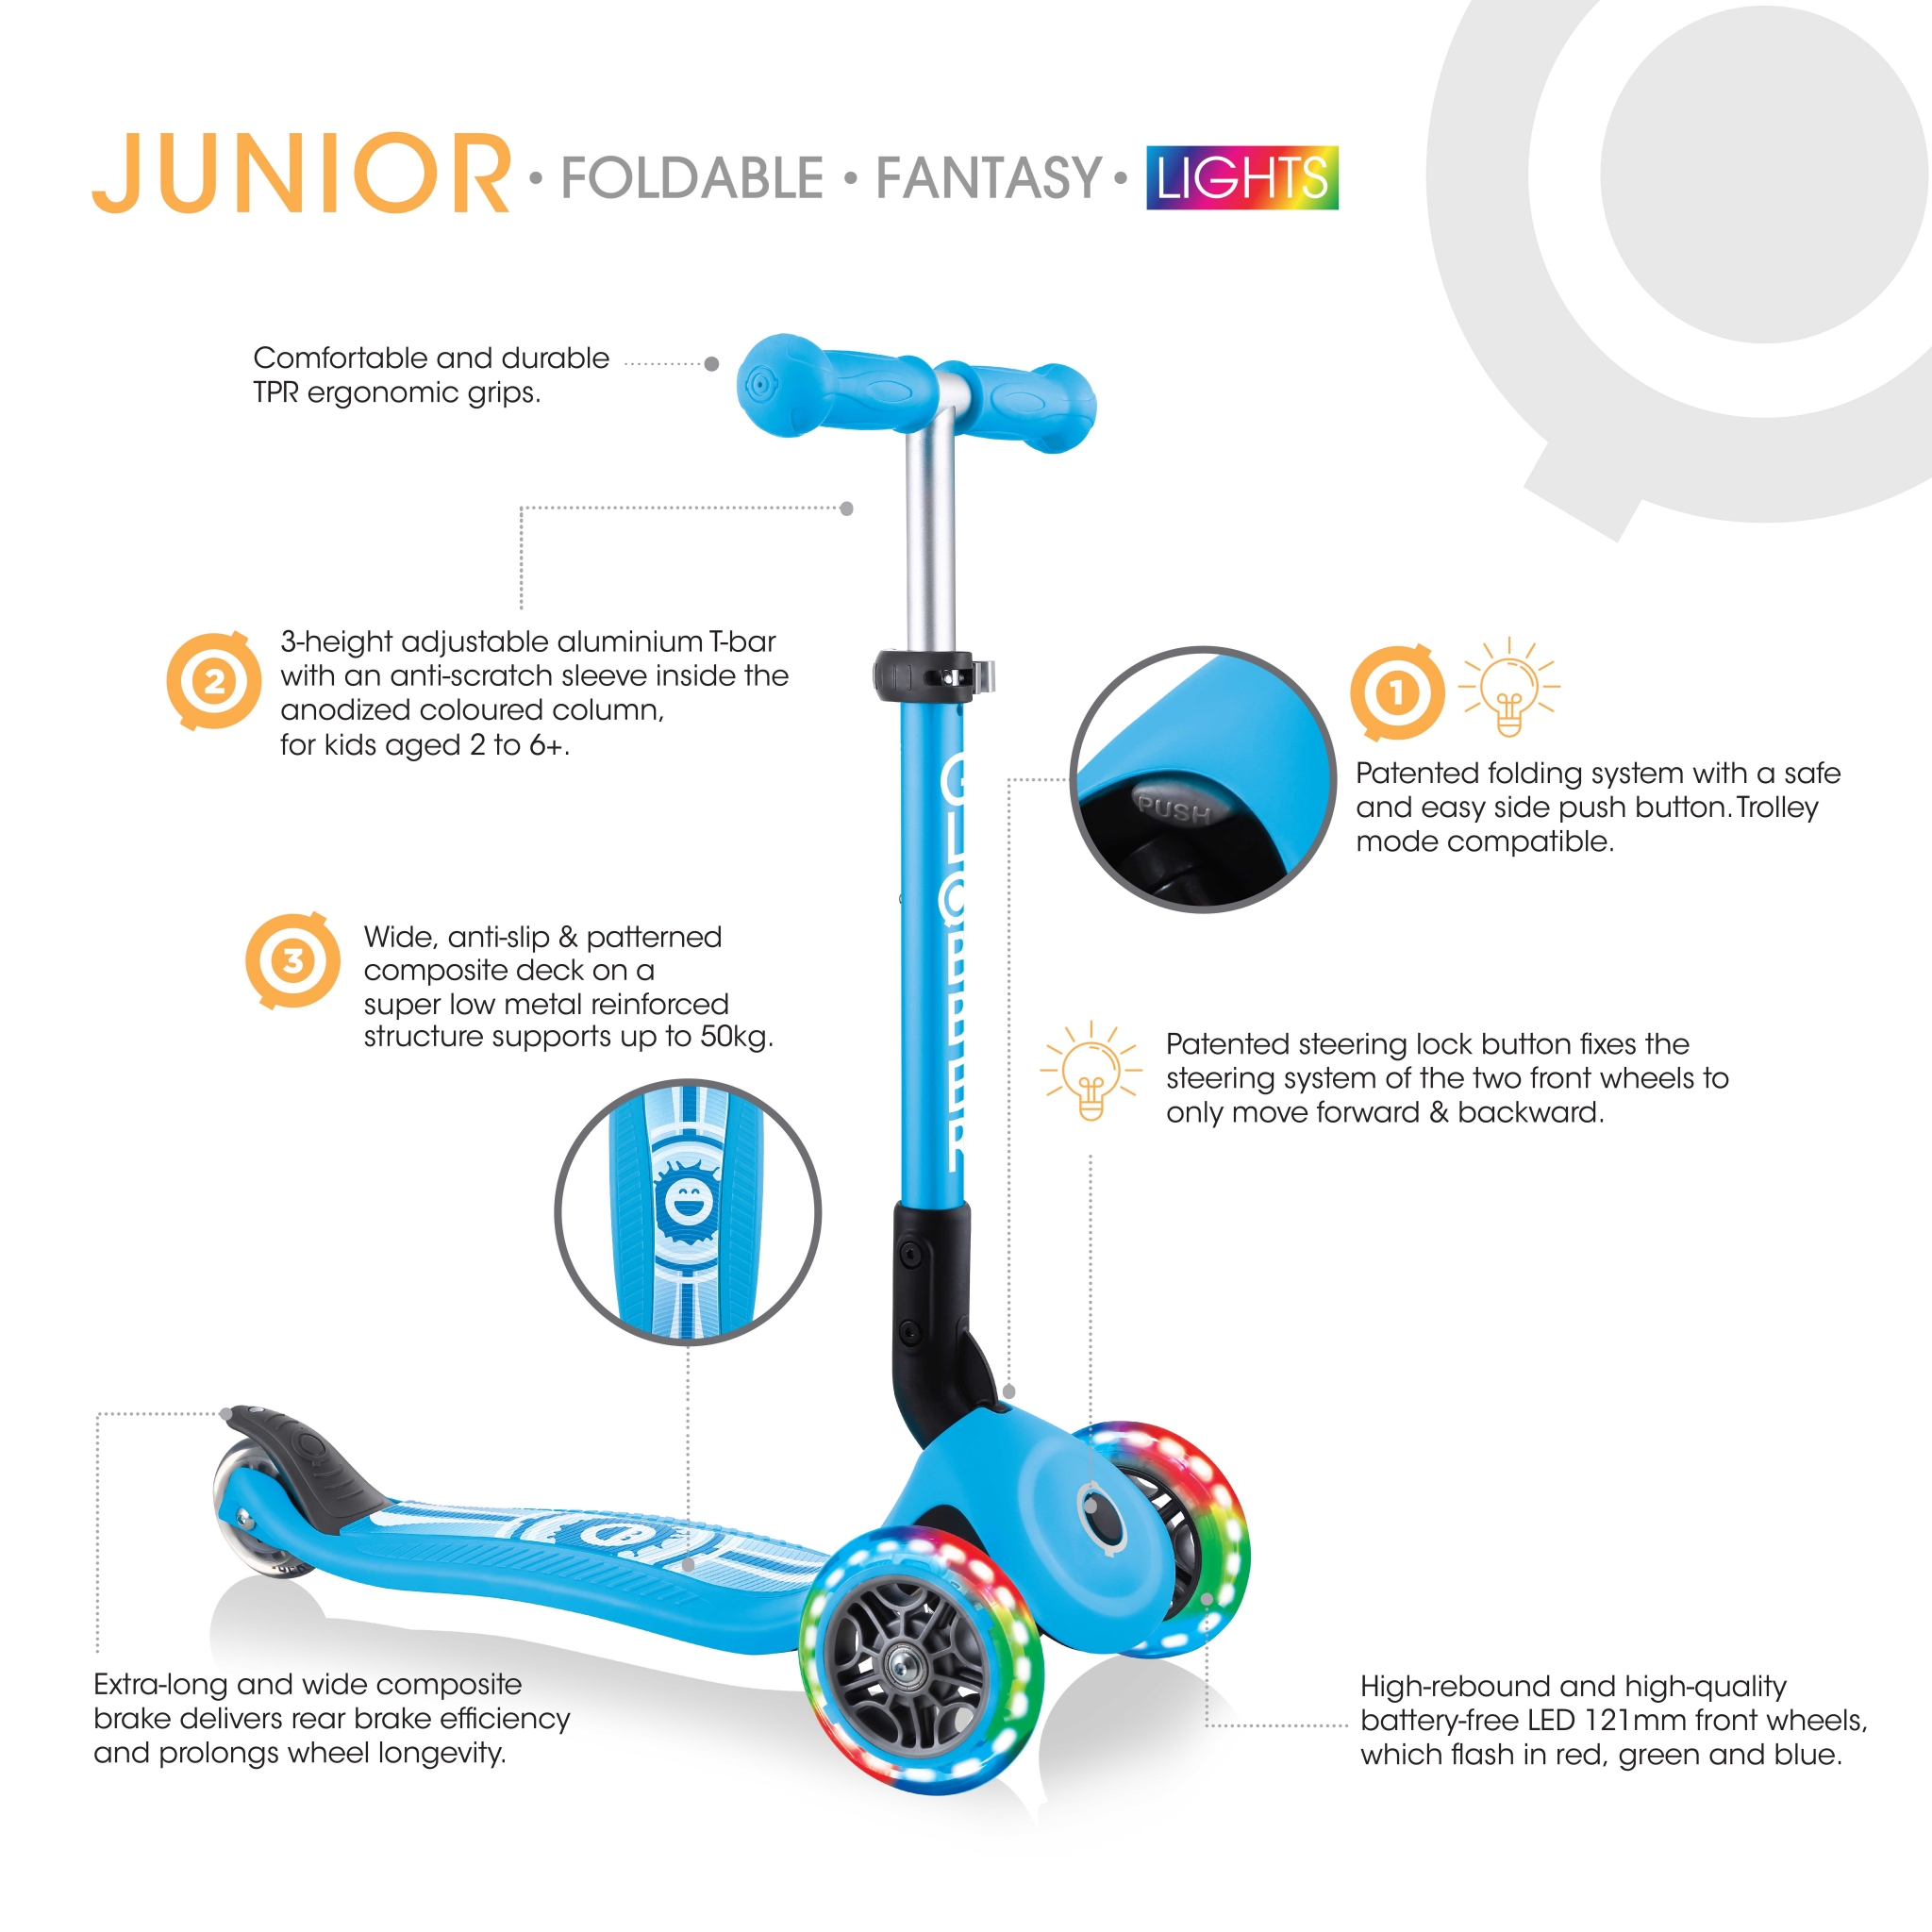 junior-foldable-fantasy-lights-3-wheel-scooter-for-2-year-old 1